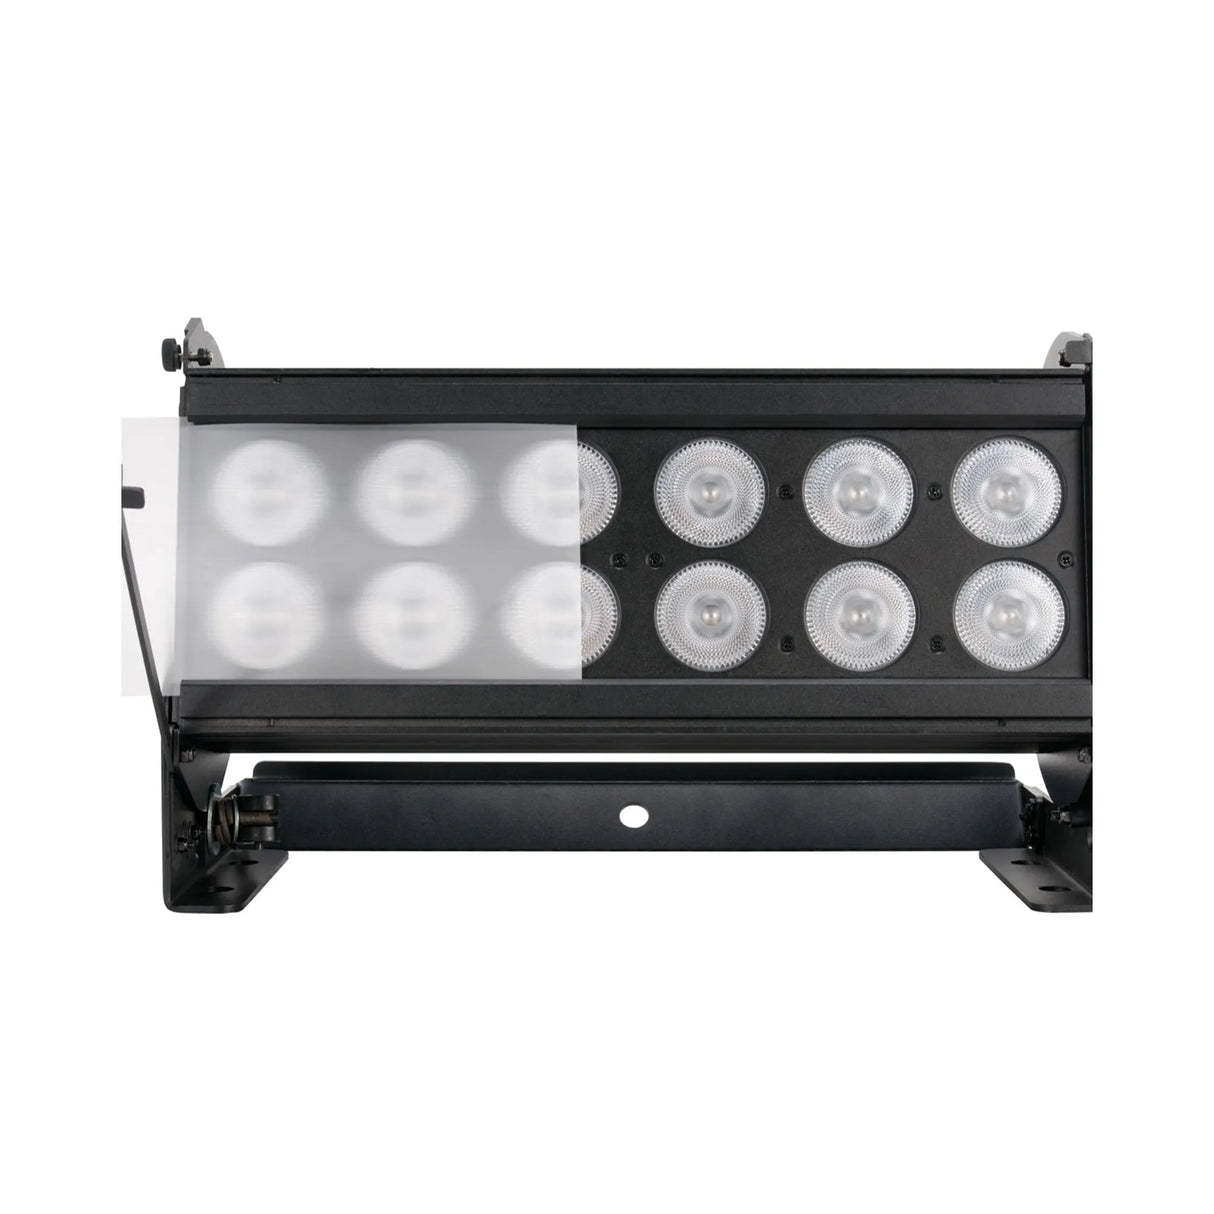 Elation Seven Batten 14 Wash Luminaire with 7-in-1 RGBAW/Lime/UV LEDs